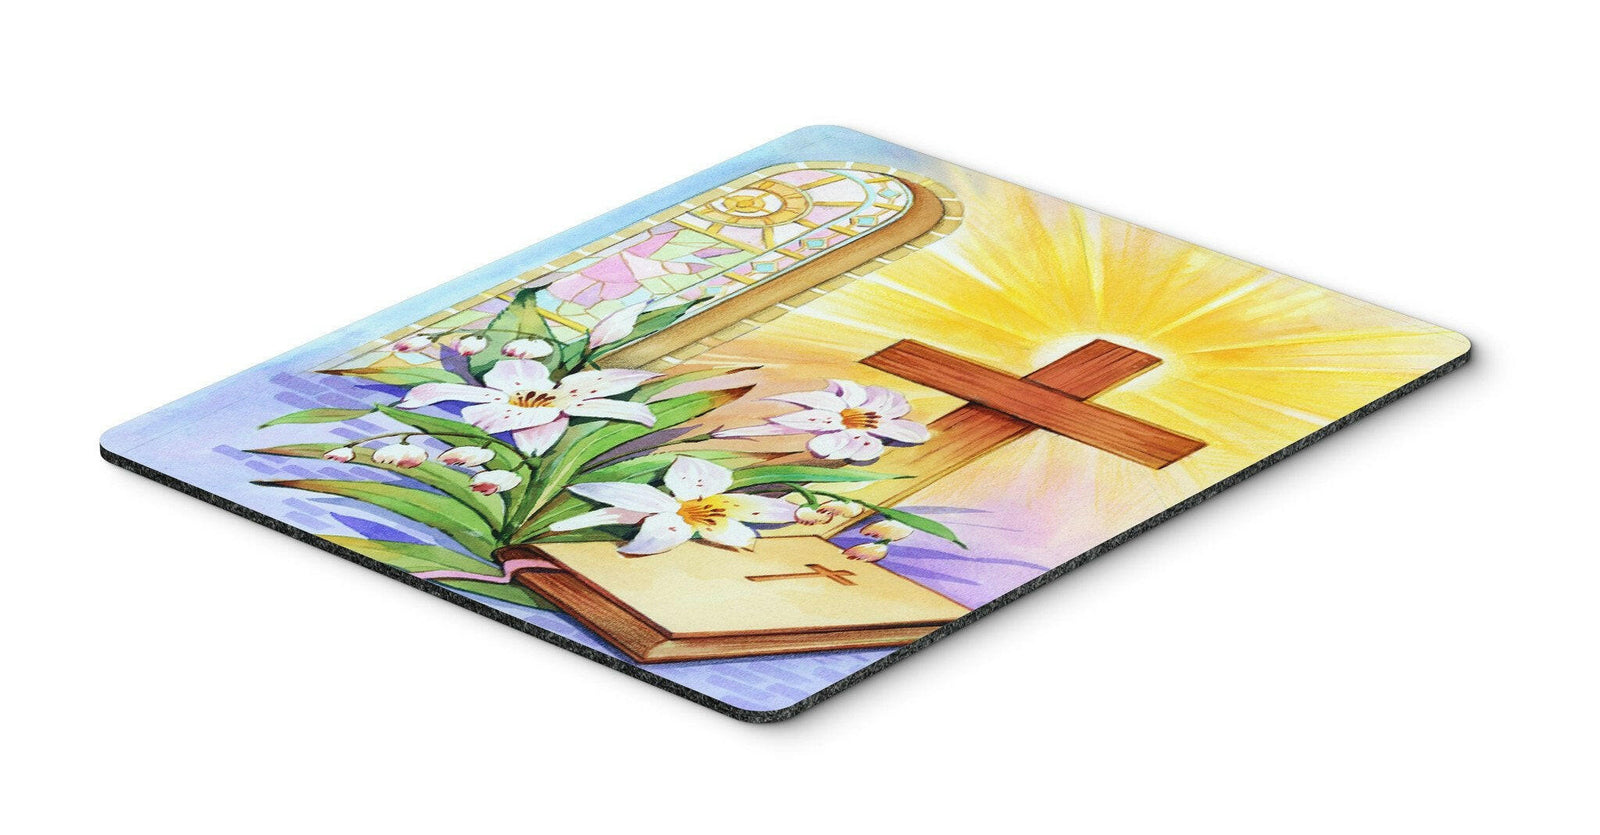 Easter Cross and Bible in Stain Glass Window Mouse Pad, Hot Pad or Trivet APH5433MP by Caroline's Treasures